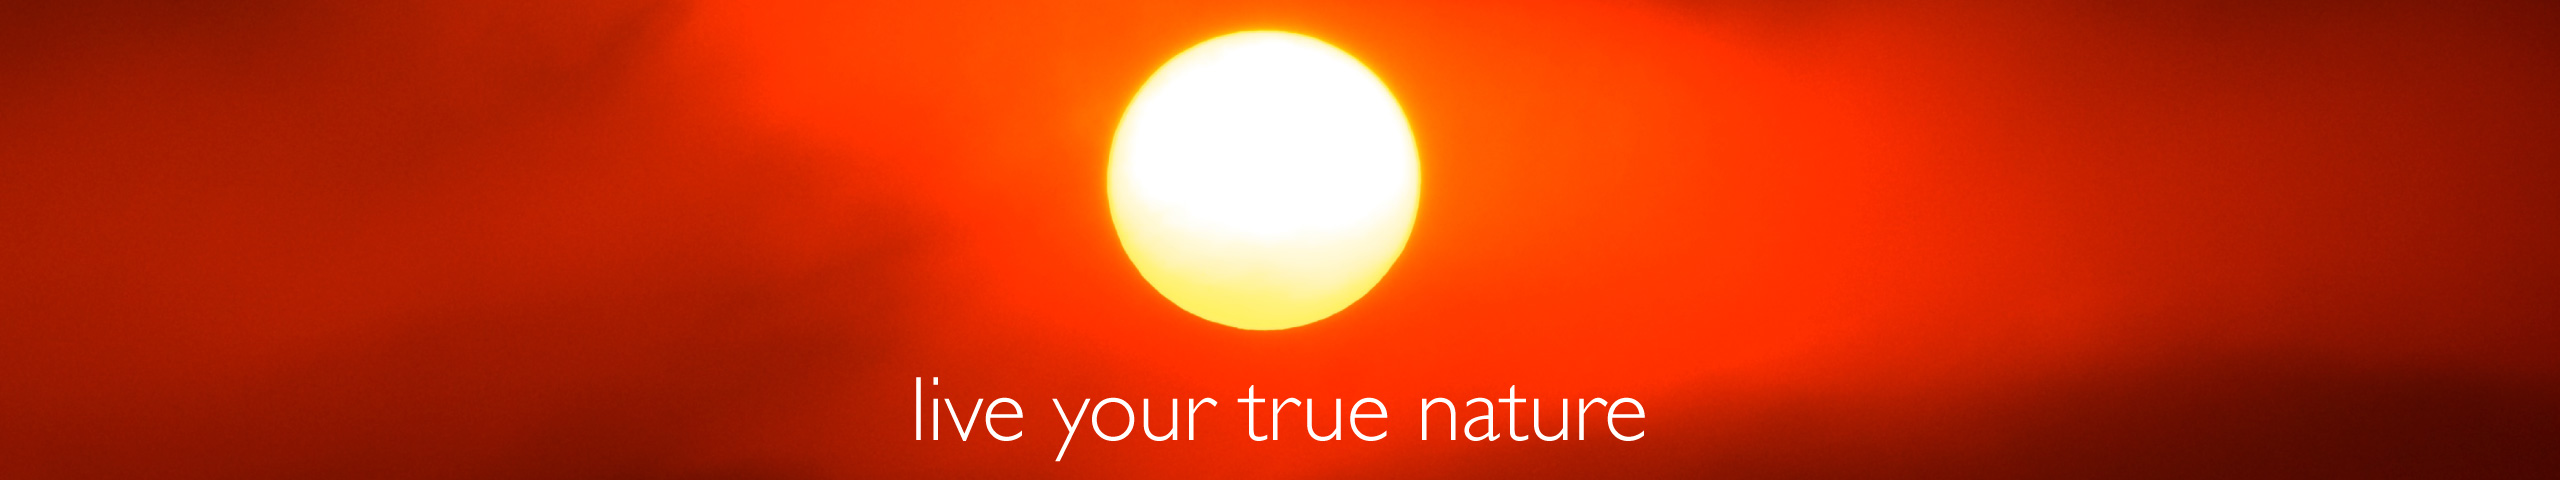 live your true nature